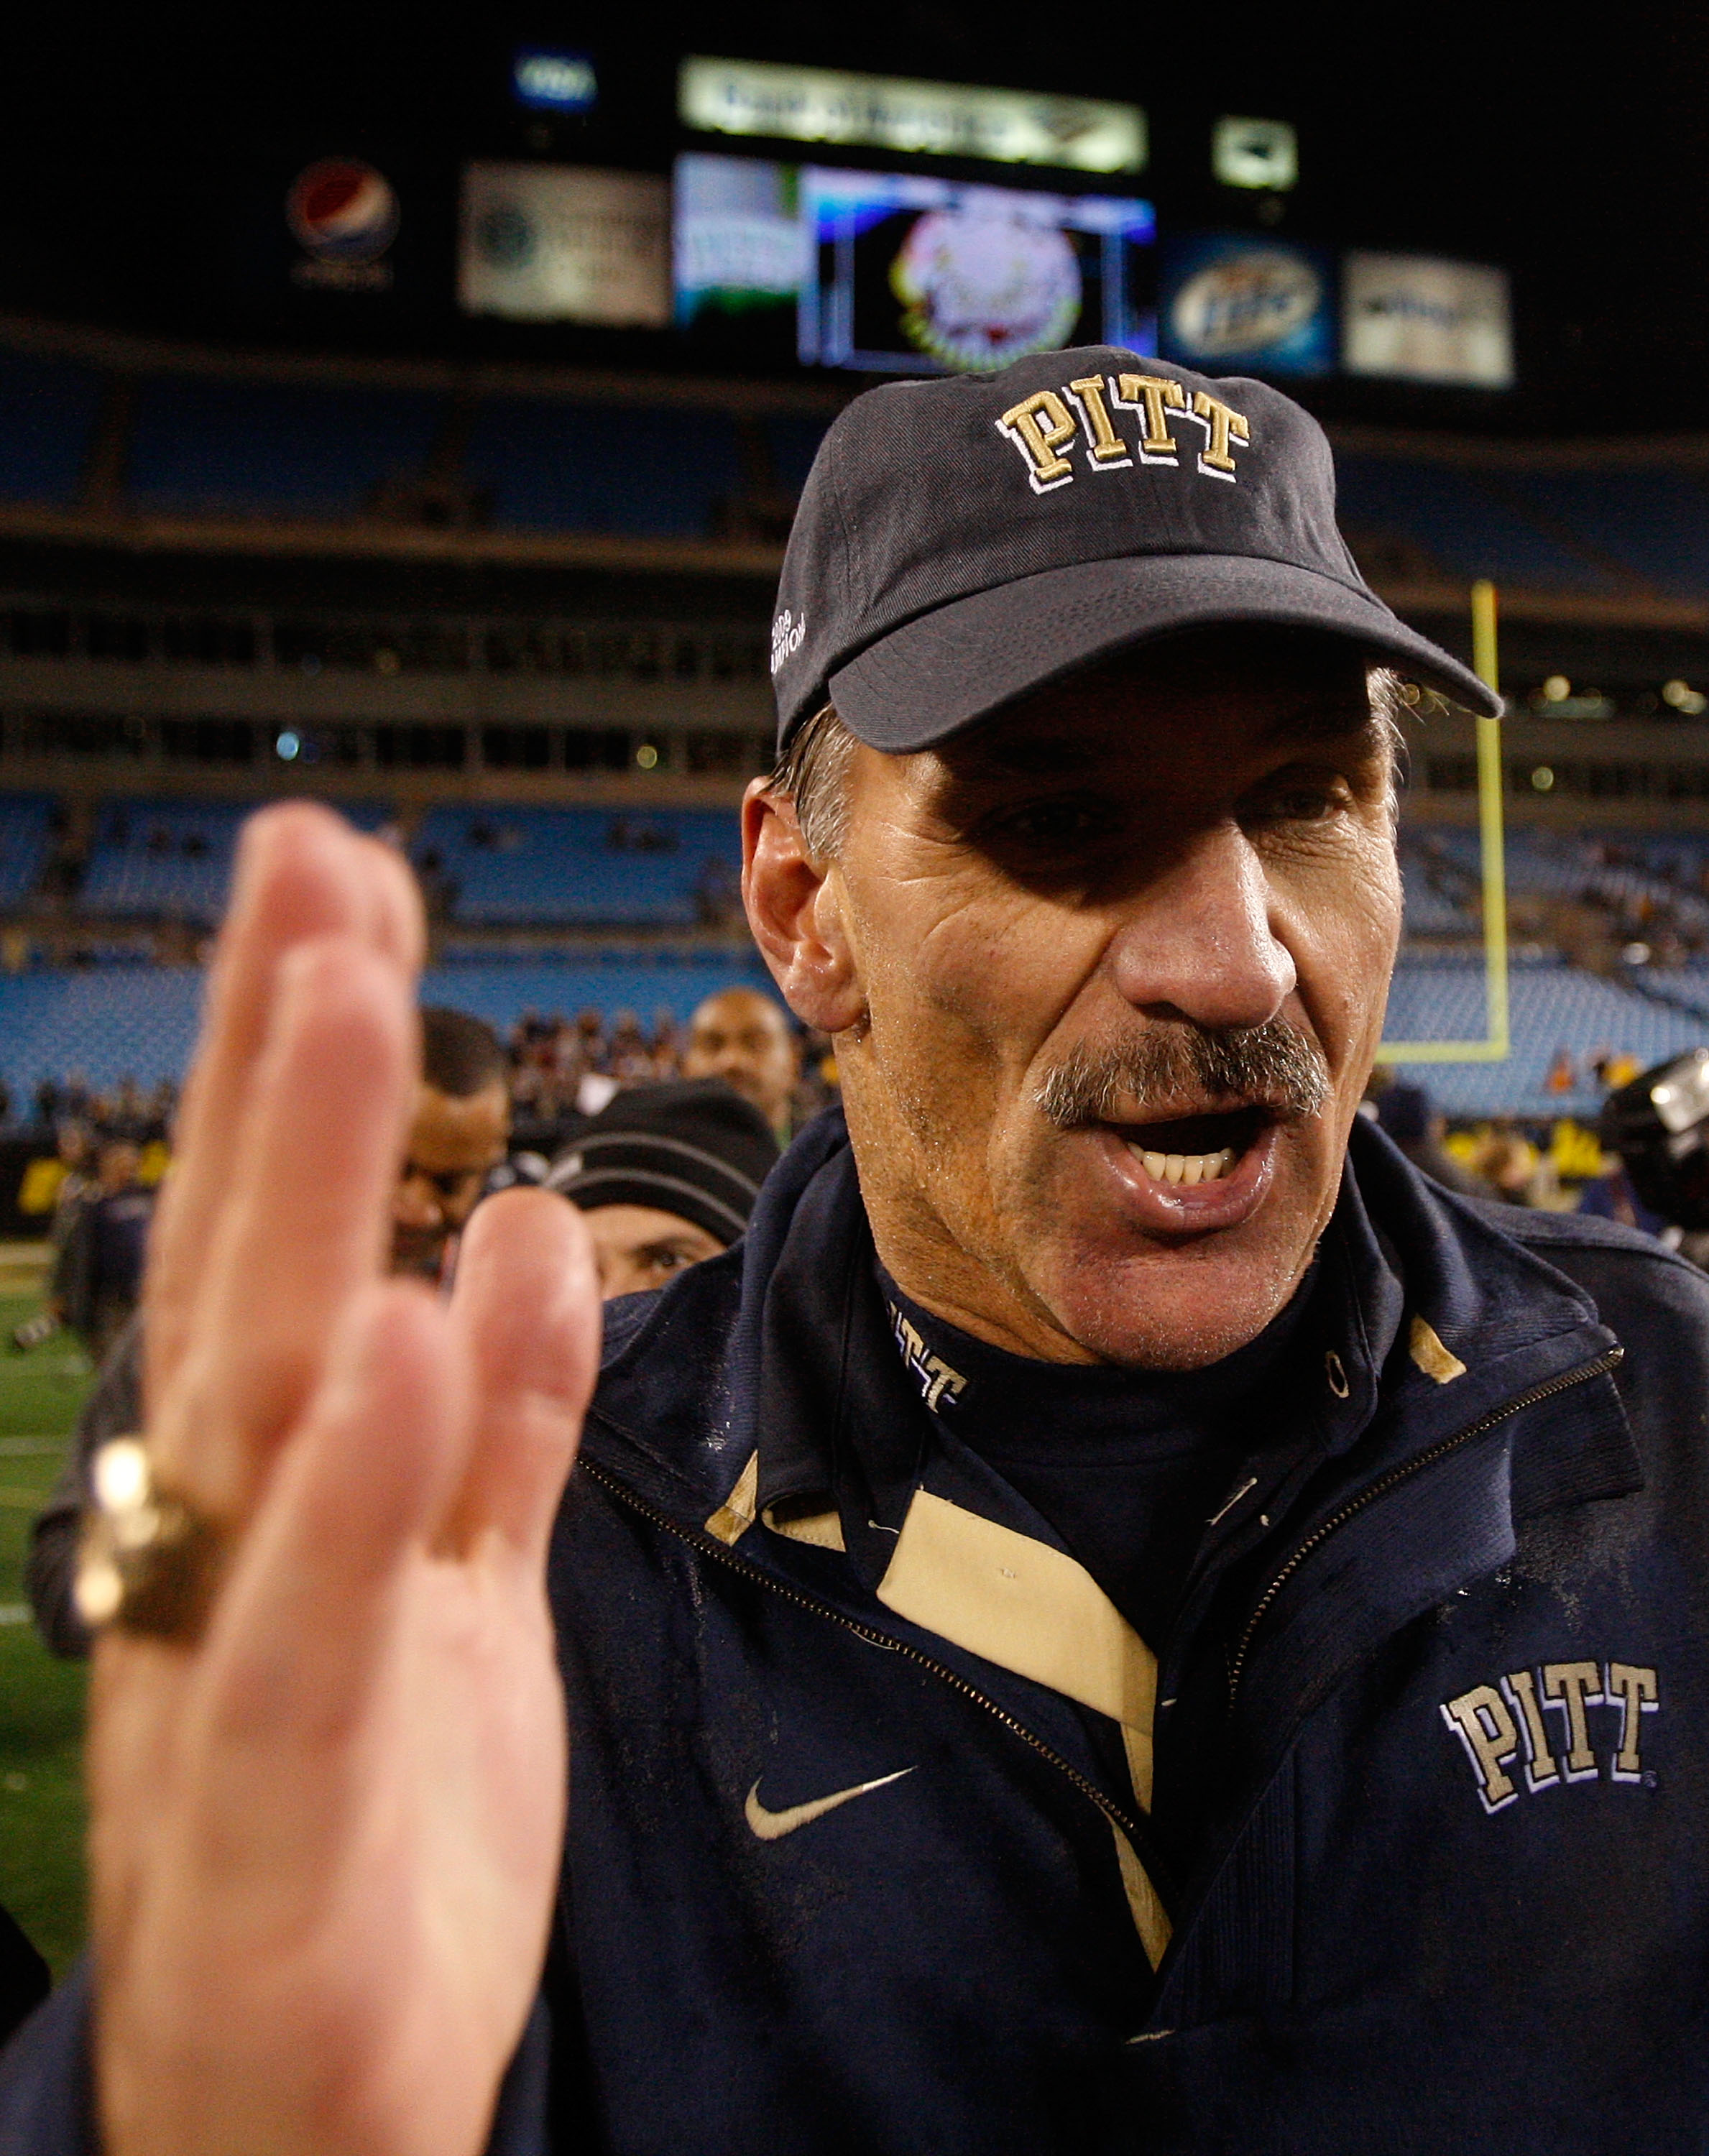 CHARLOTTE, NC - DECEMBER 26:  Head coach Dave Wannstedt of the Pittsburgh Panthers celebrates with players after a 19-17 victory over the North Carolina Tar Heels on December 26, 2009 in Charlotte, North Carolina.  (Photo by Streeter Lecka/Getty Images)